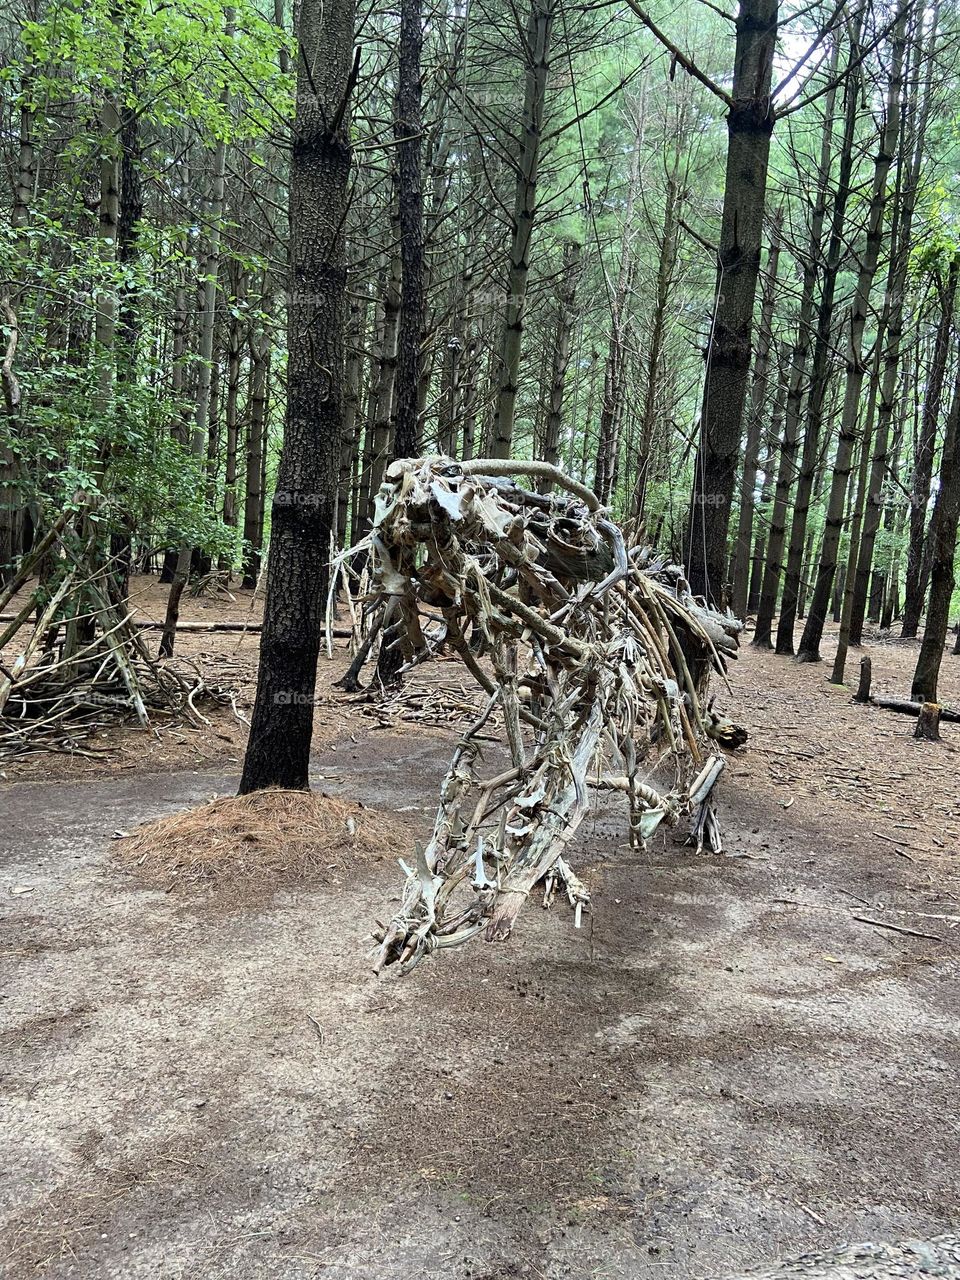 Dinosaur made from tree branches that a local artist made in the woods of Allaire State Park. This is one if my favorite places to walk. Everyone loves it, especially the children. Magical! 